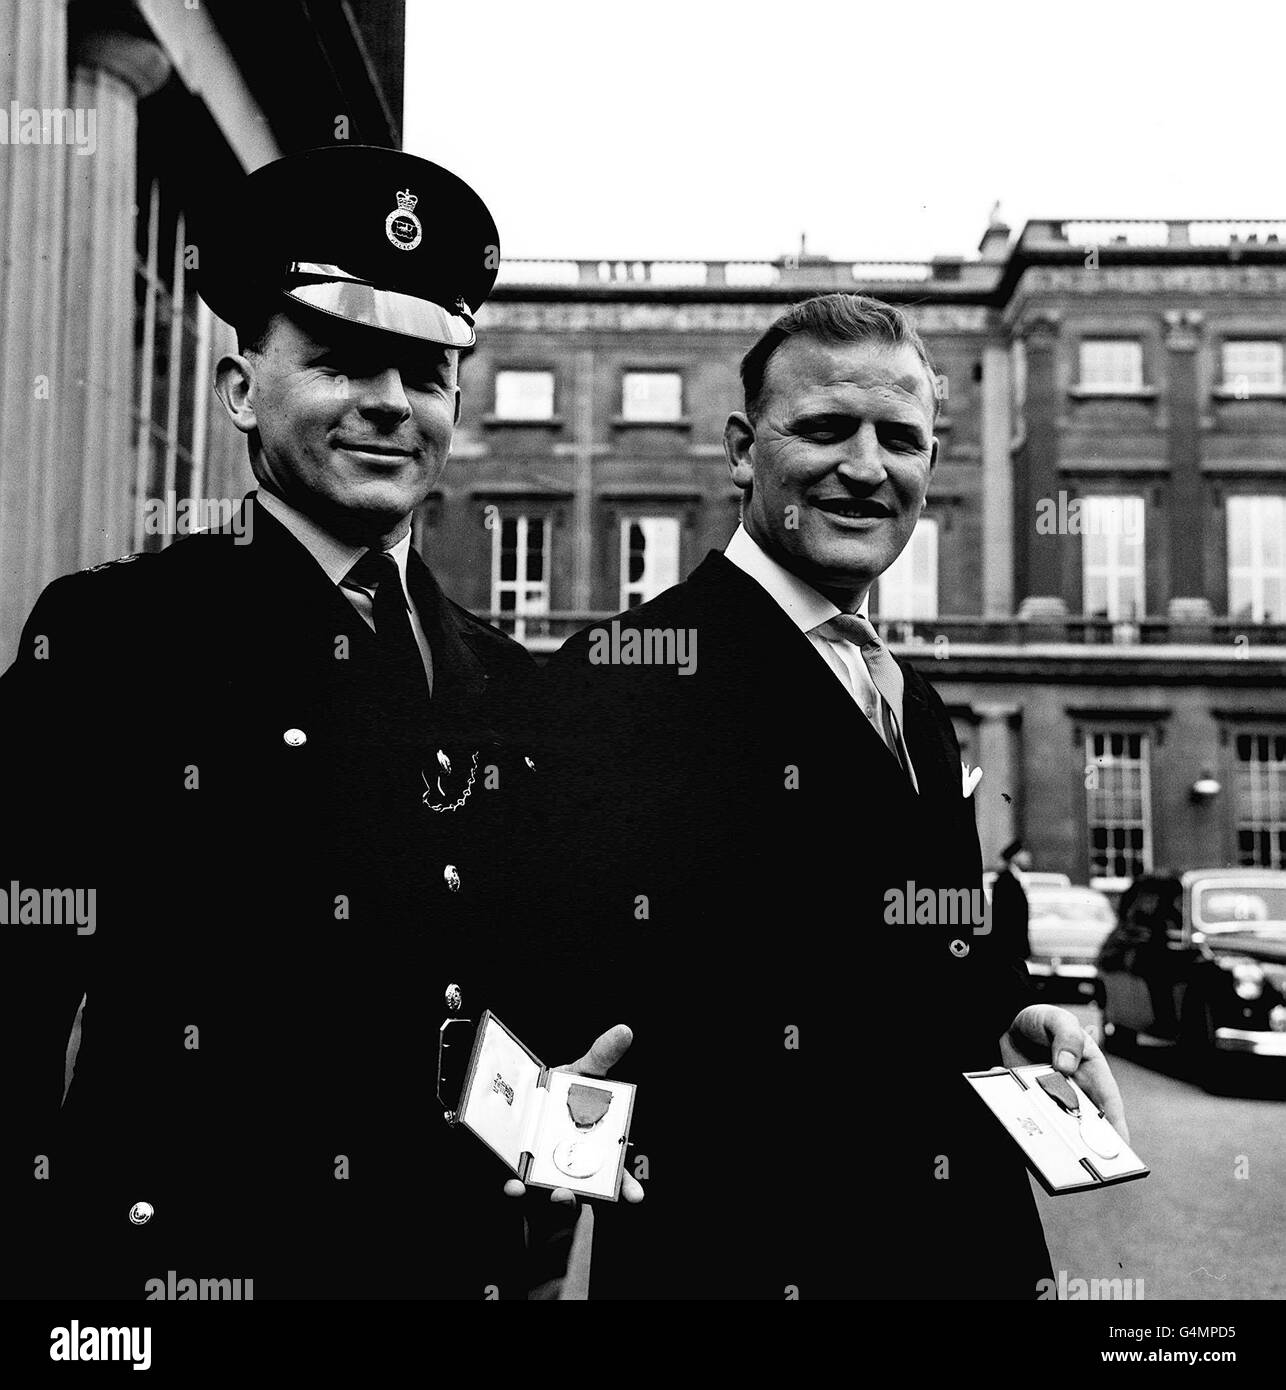 Metropolitan Police officers, Constable Michael Wheelhouse (left) and Detective-Sergeant Peter Woodmore, leave Buckingham Palace with the George Medals they received from the Queen for their part in the capture of a dangerous armed criminal. * After a chase which started in Parliament Square, PC Wheelhouse was shot in the arm before Sergeant Woodmore crashed the criminal to the ground with a 10ft leap in the grounds of a Kensington house. Stock Photo